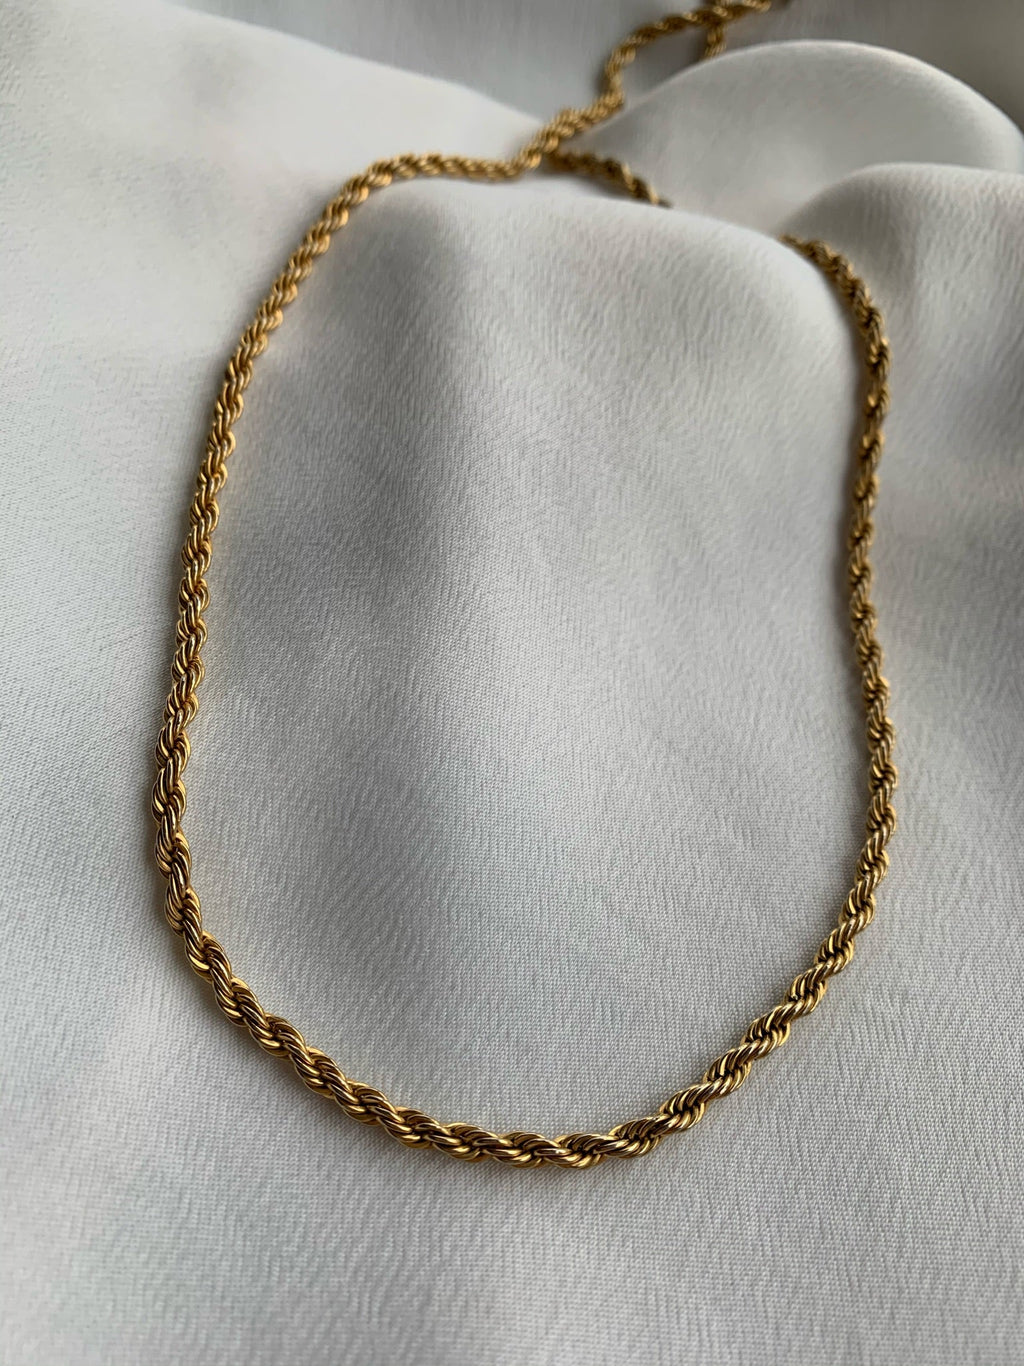 Timeless & elegant, add the rope chain as the first or second necklace in your stack! 14K Gold Plated Hypoallergenic Tarnish Resistant 45cm length 4mm (thick) OR 2mm (thin) chain | Easy Rope Chain Necklace | Non-tarnish 14k Jewellery EasyClubCo